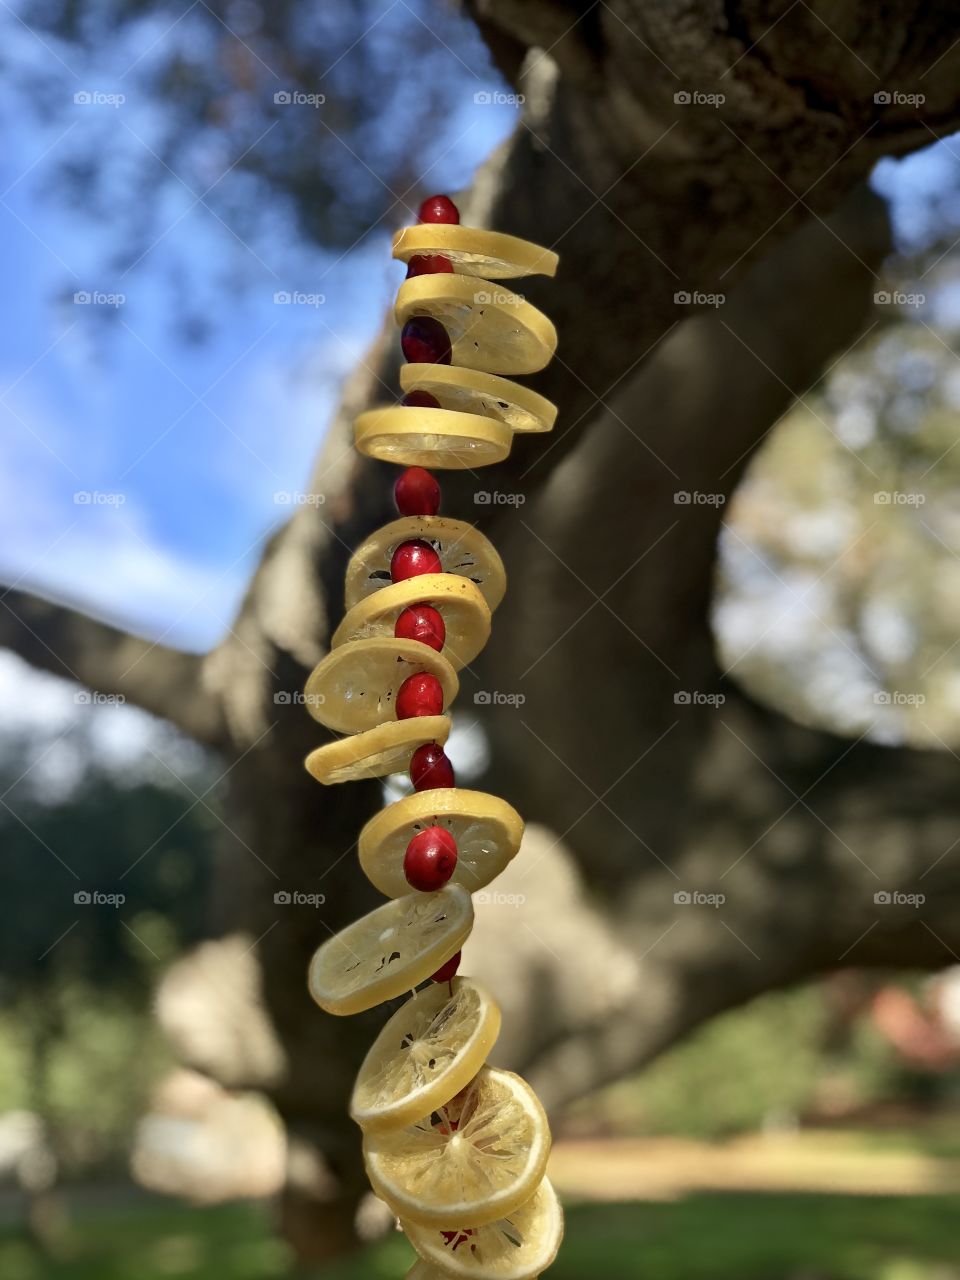 Lemon and cranberry garland hanging vertically in focus with nature in background 